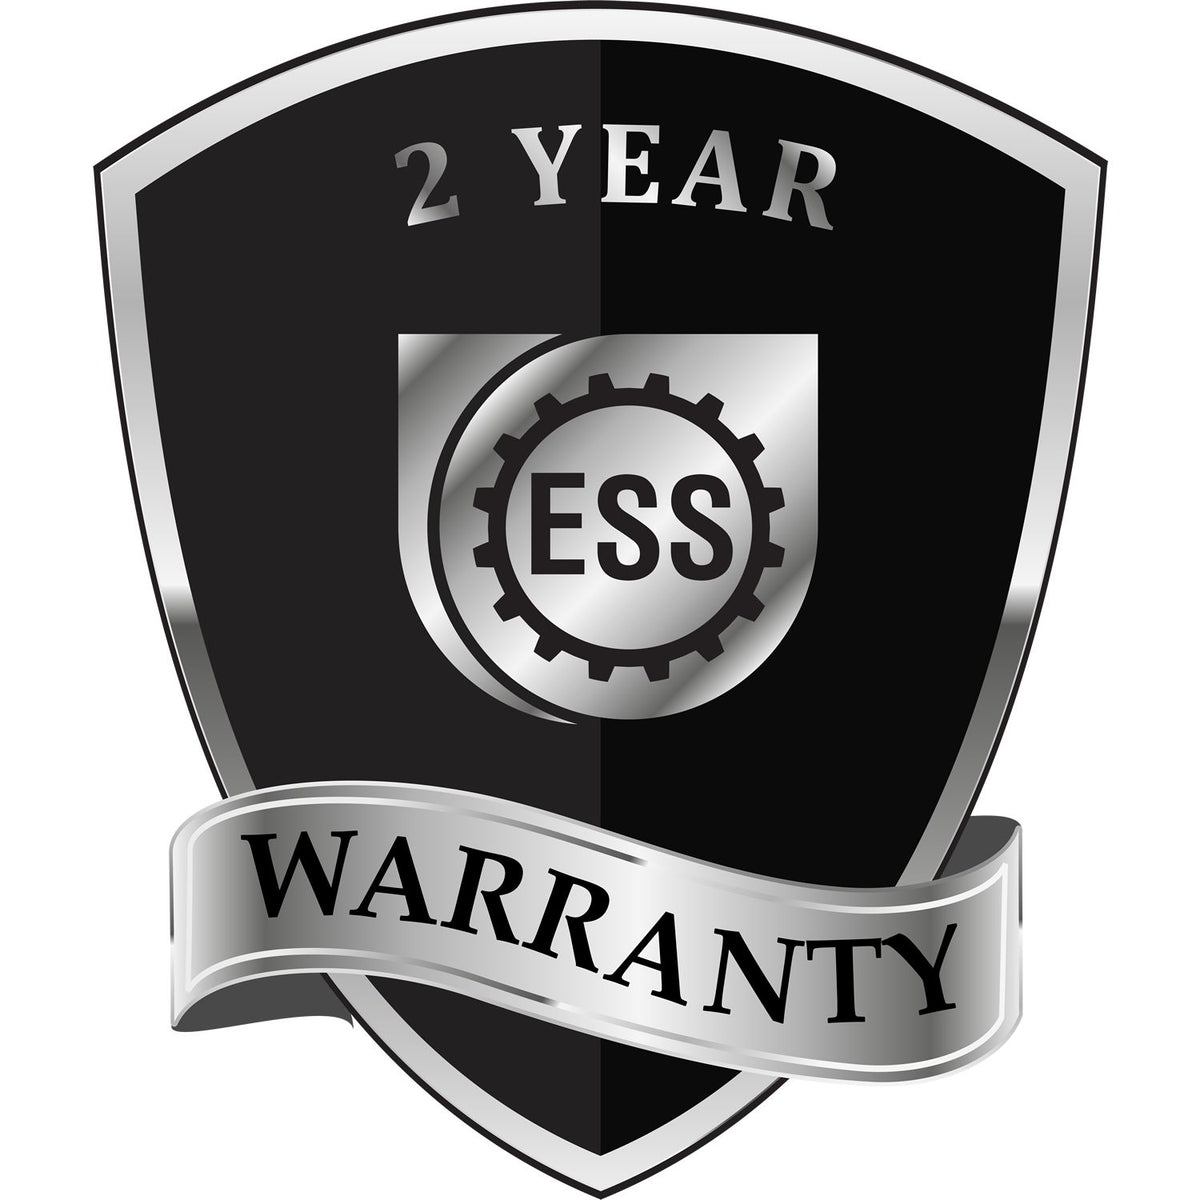 A badge or emblem showing a warranty icon for the Heavy Duty Cast Iron Maryland Architect Embosser